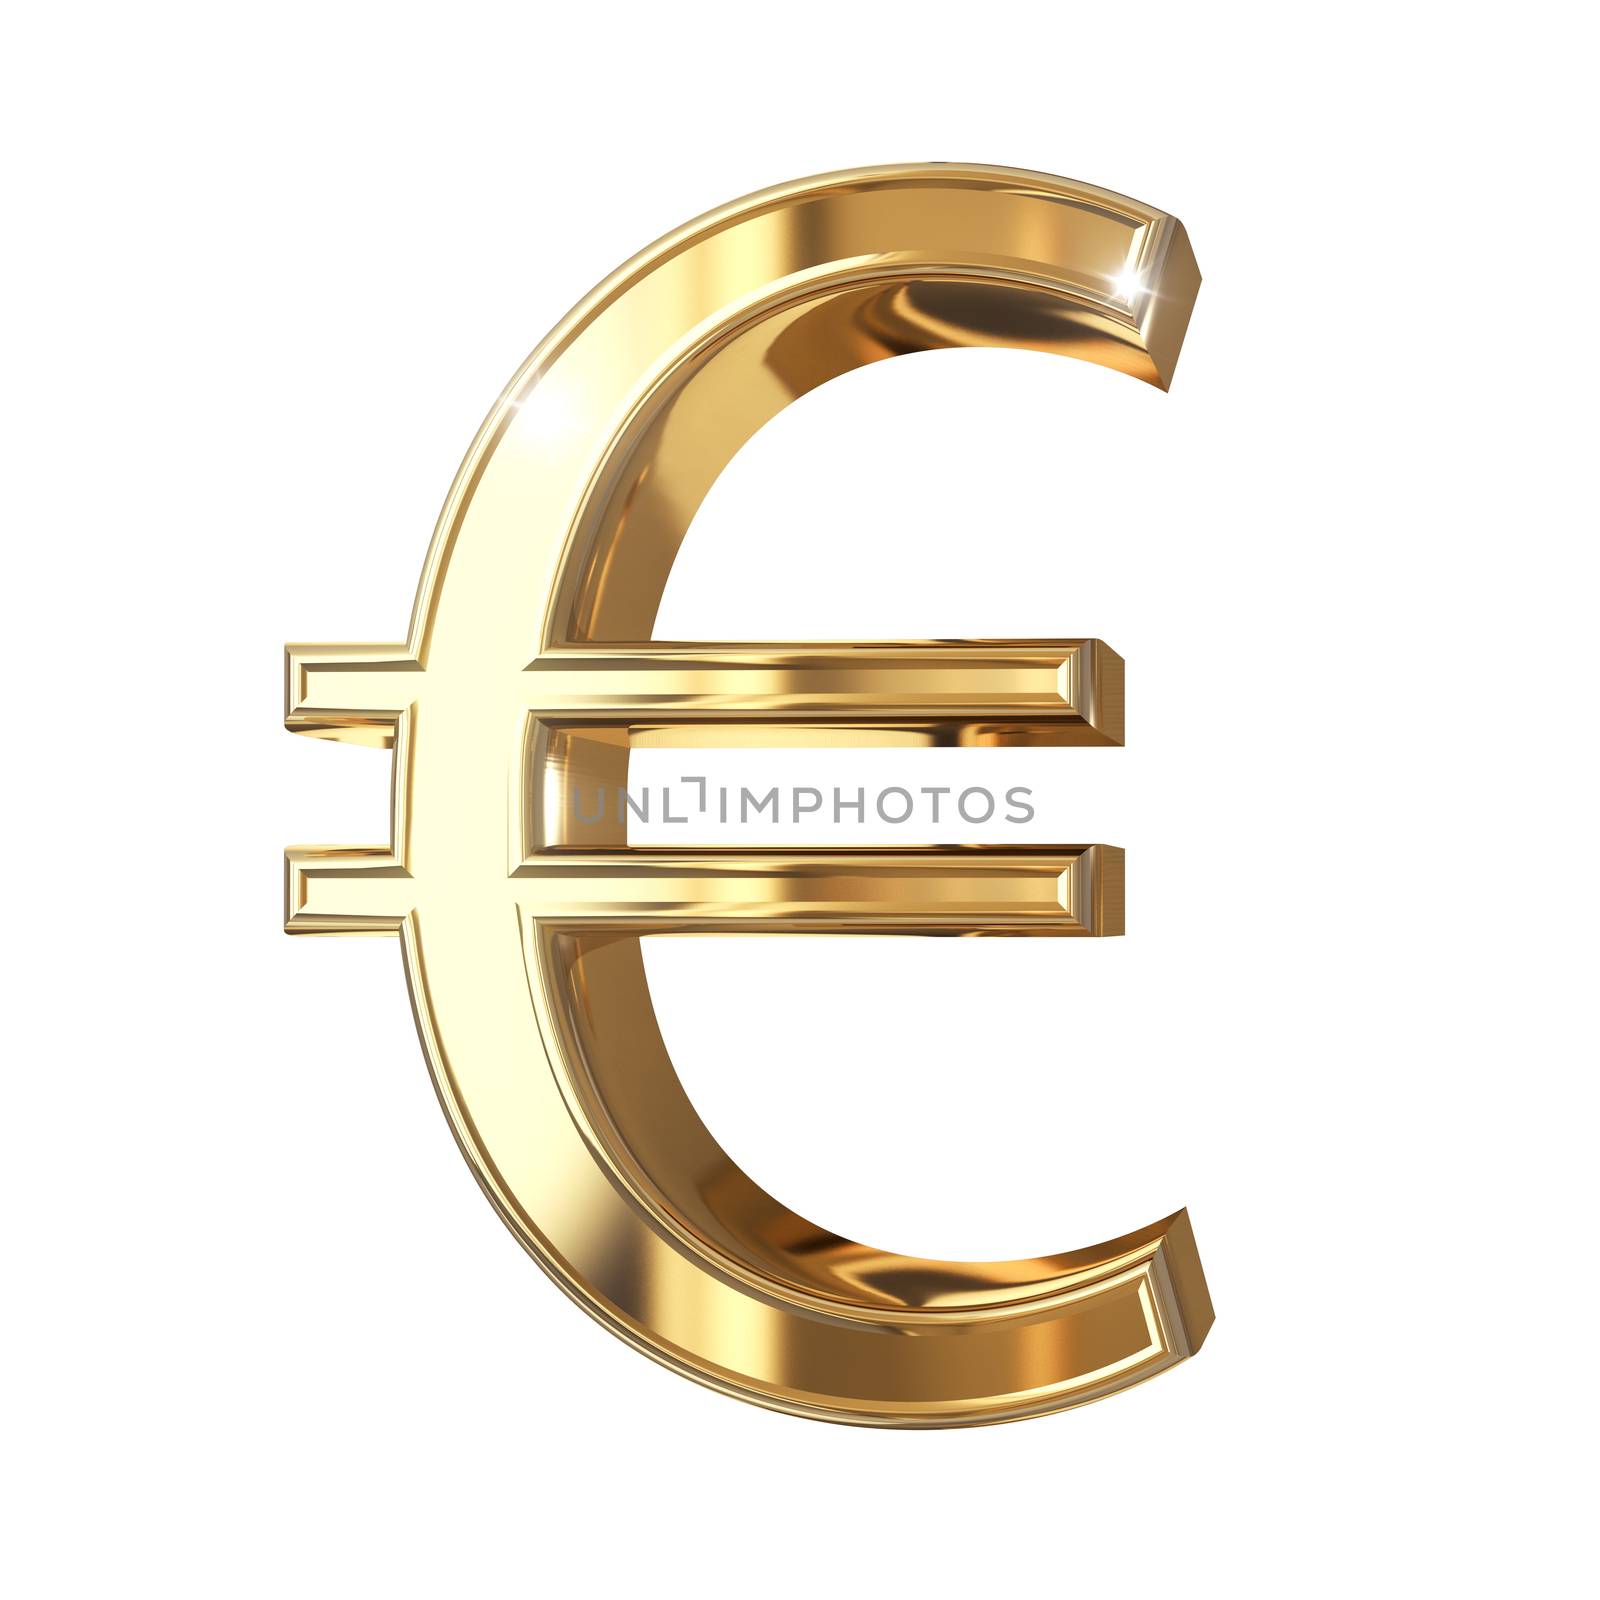 Golden 3D symbol with clipping path isolated on white background